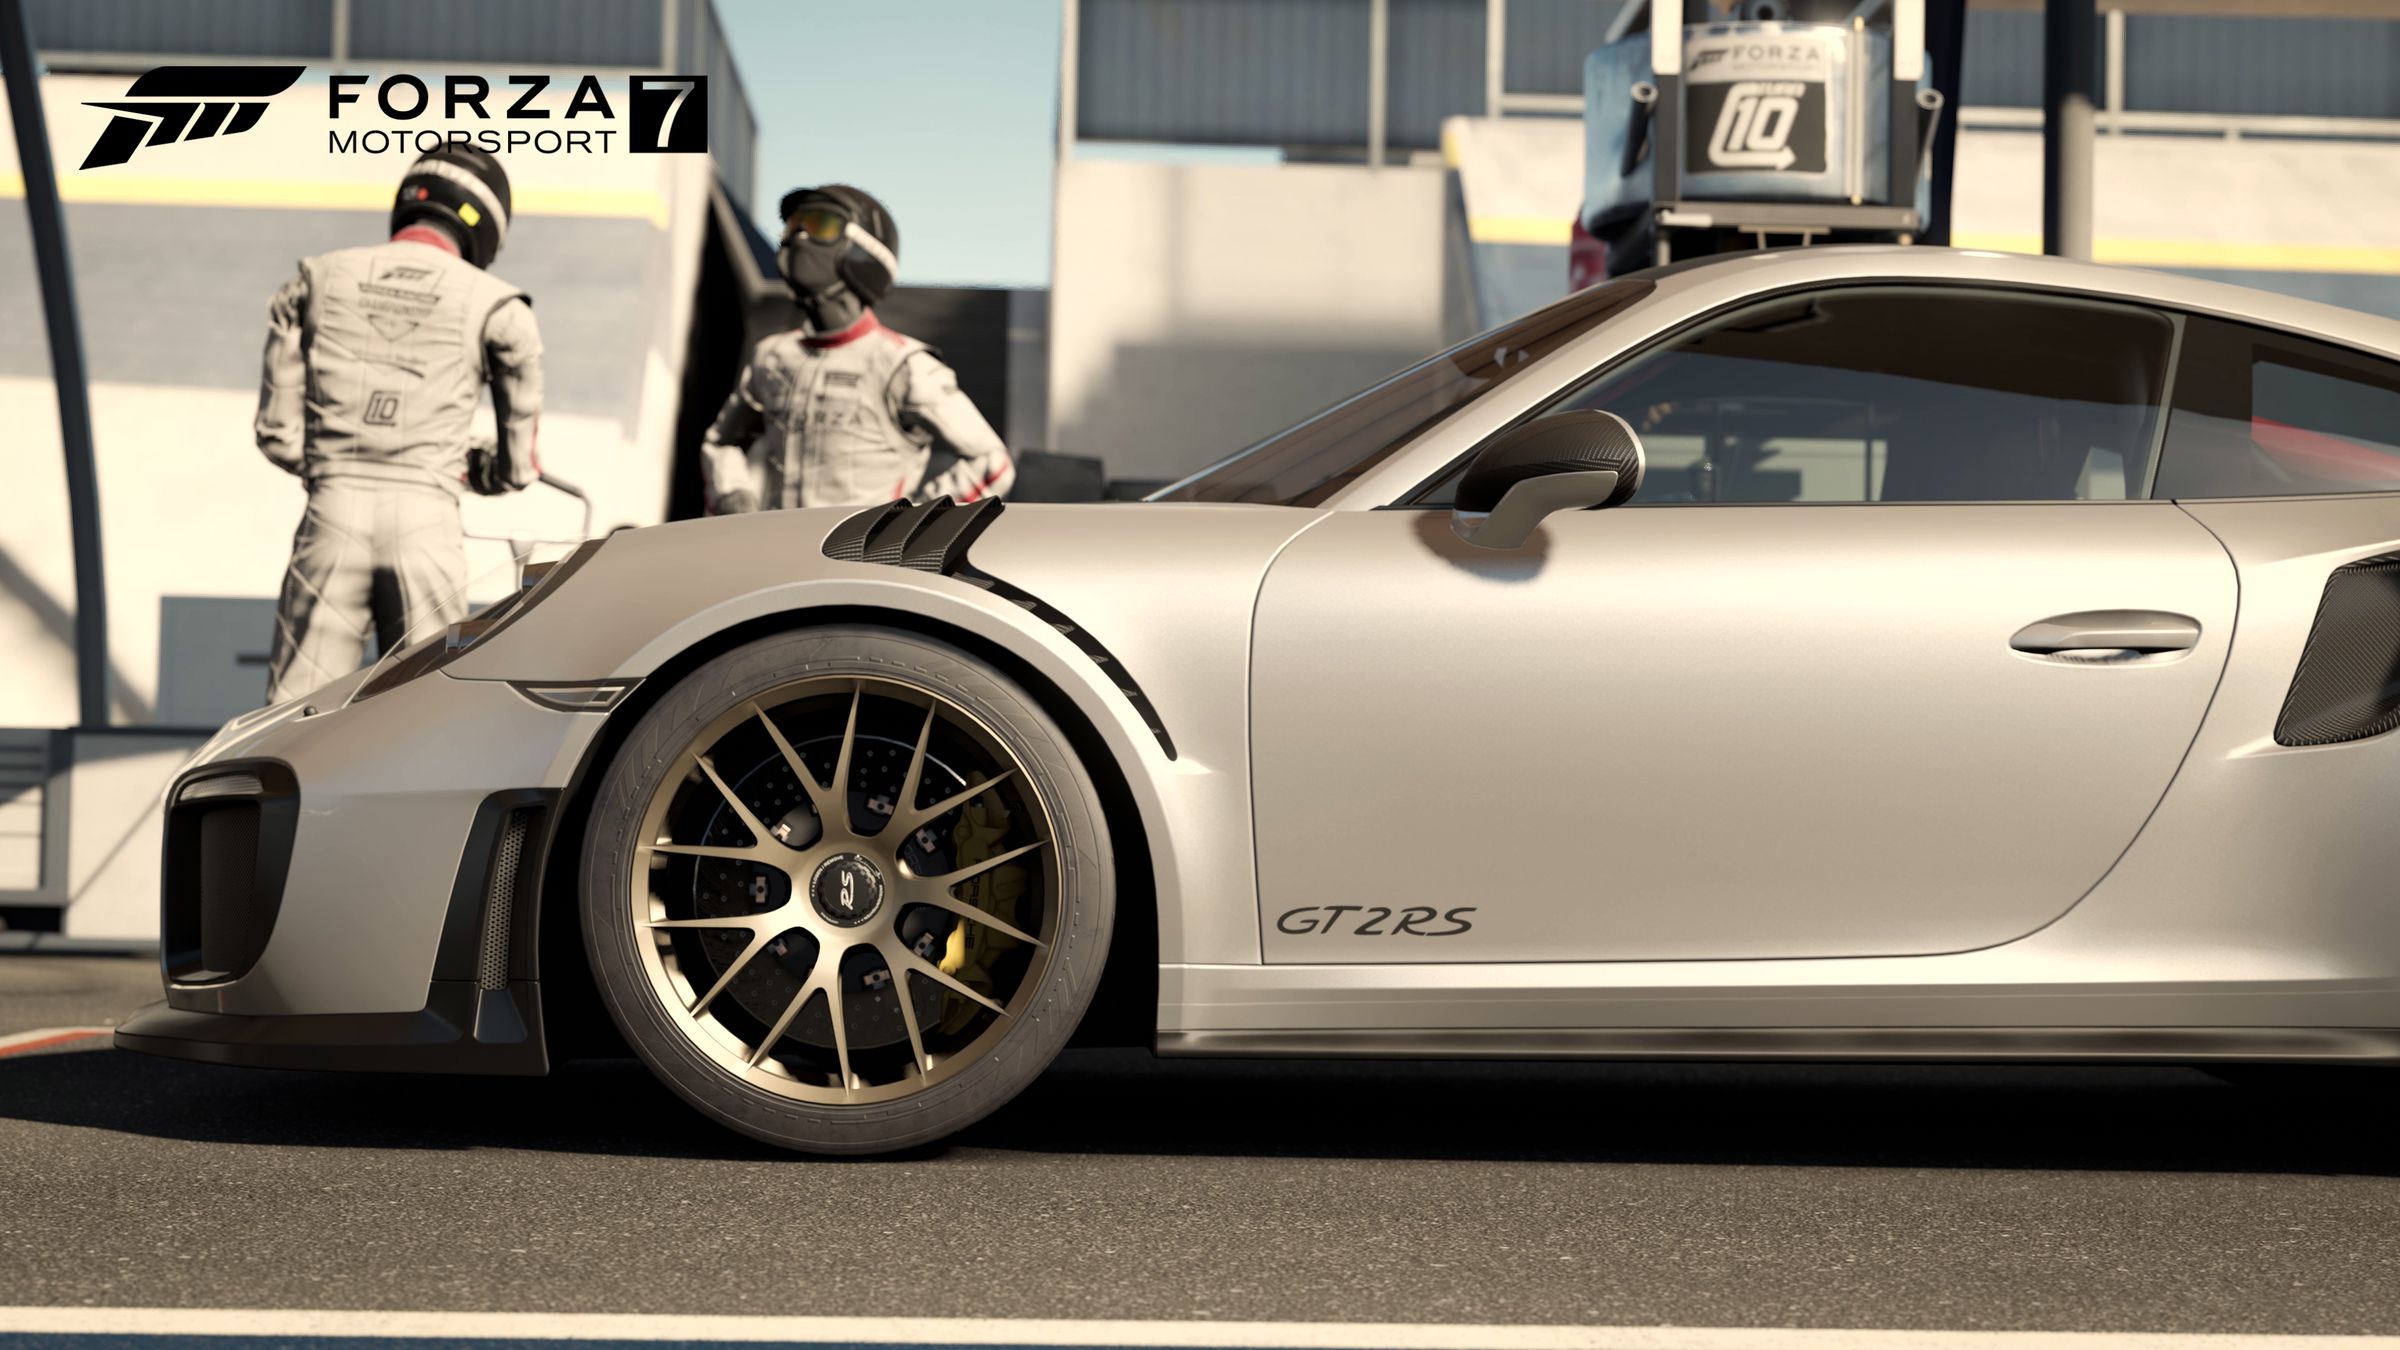 Forza Motorsport 7, from Microsoft-owned Turn 10 Studios, will play at 4K / 60 frames per second on Xbox One X. Microsoft is positioning the game as a powerful example of what the new console is capable of. 